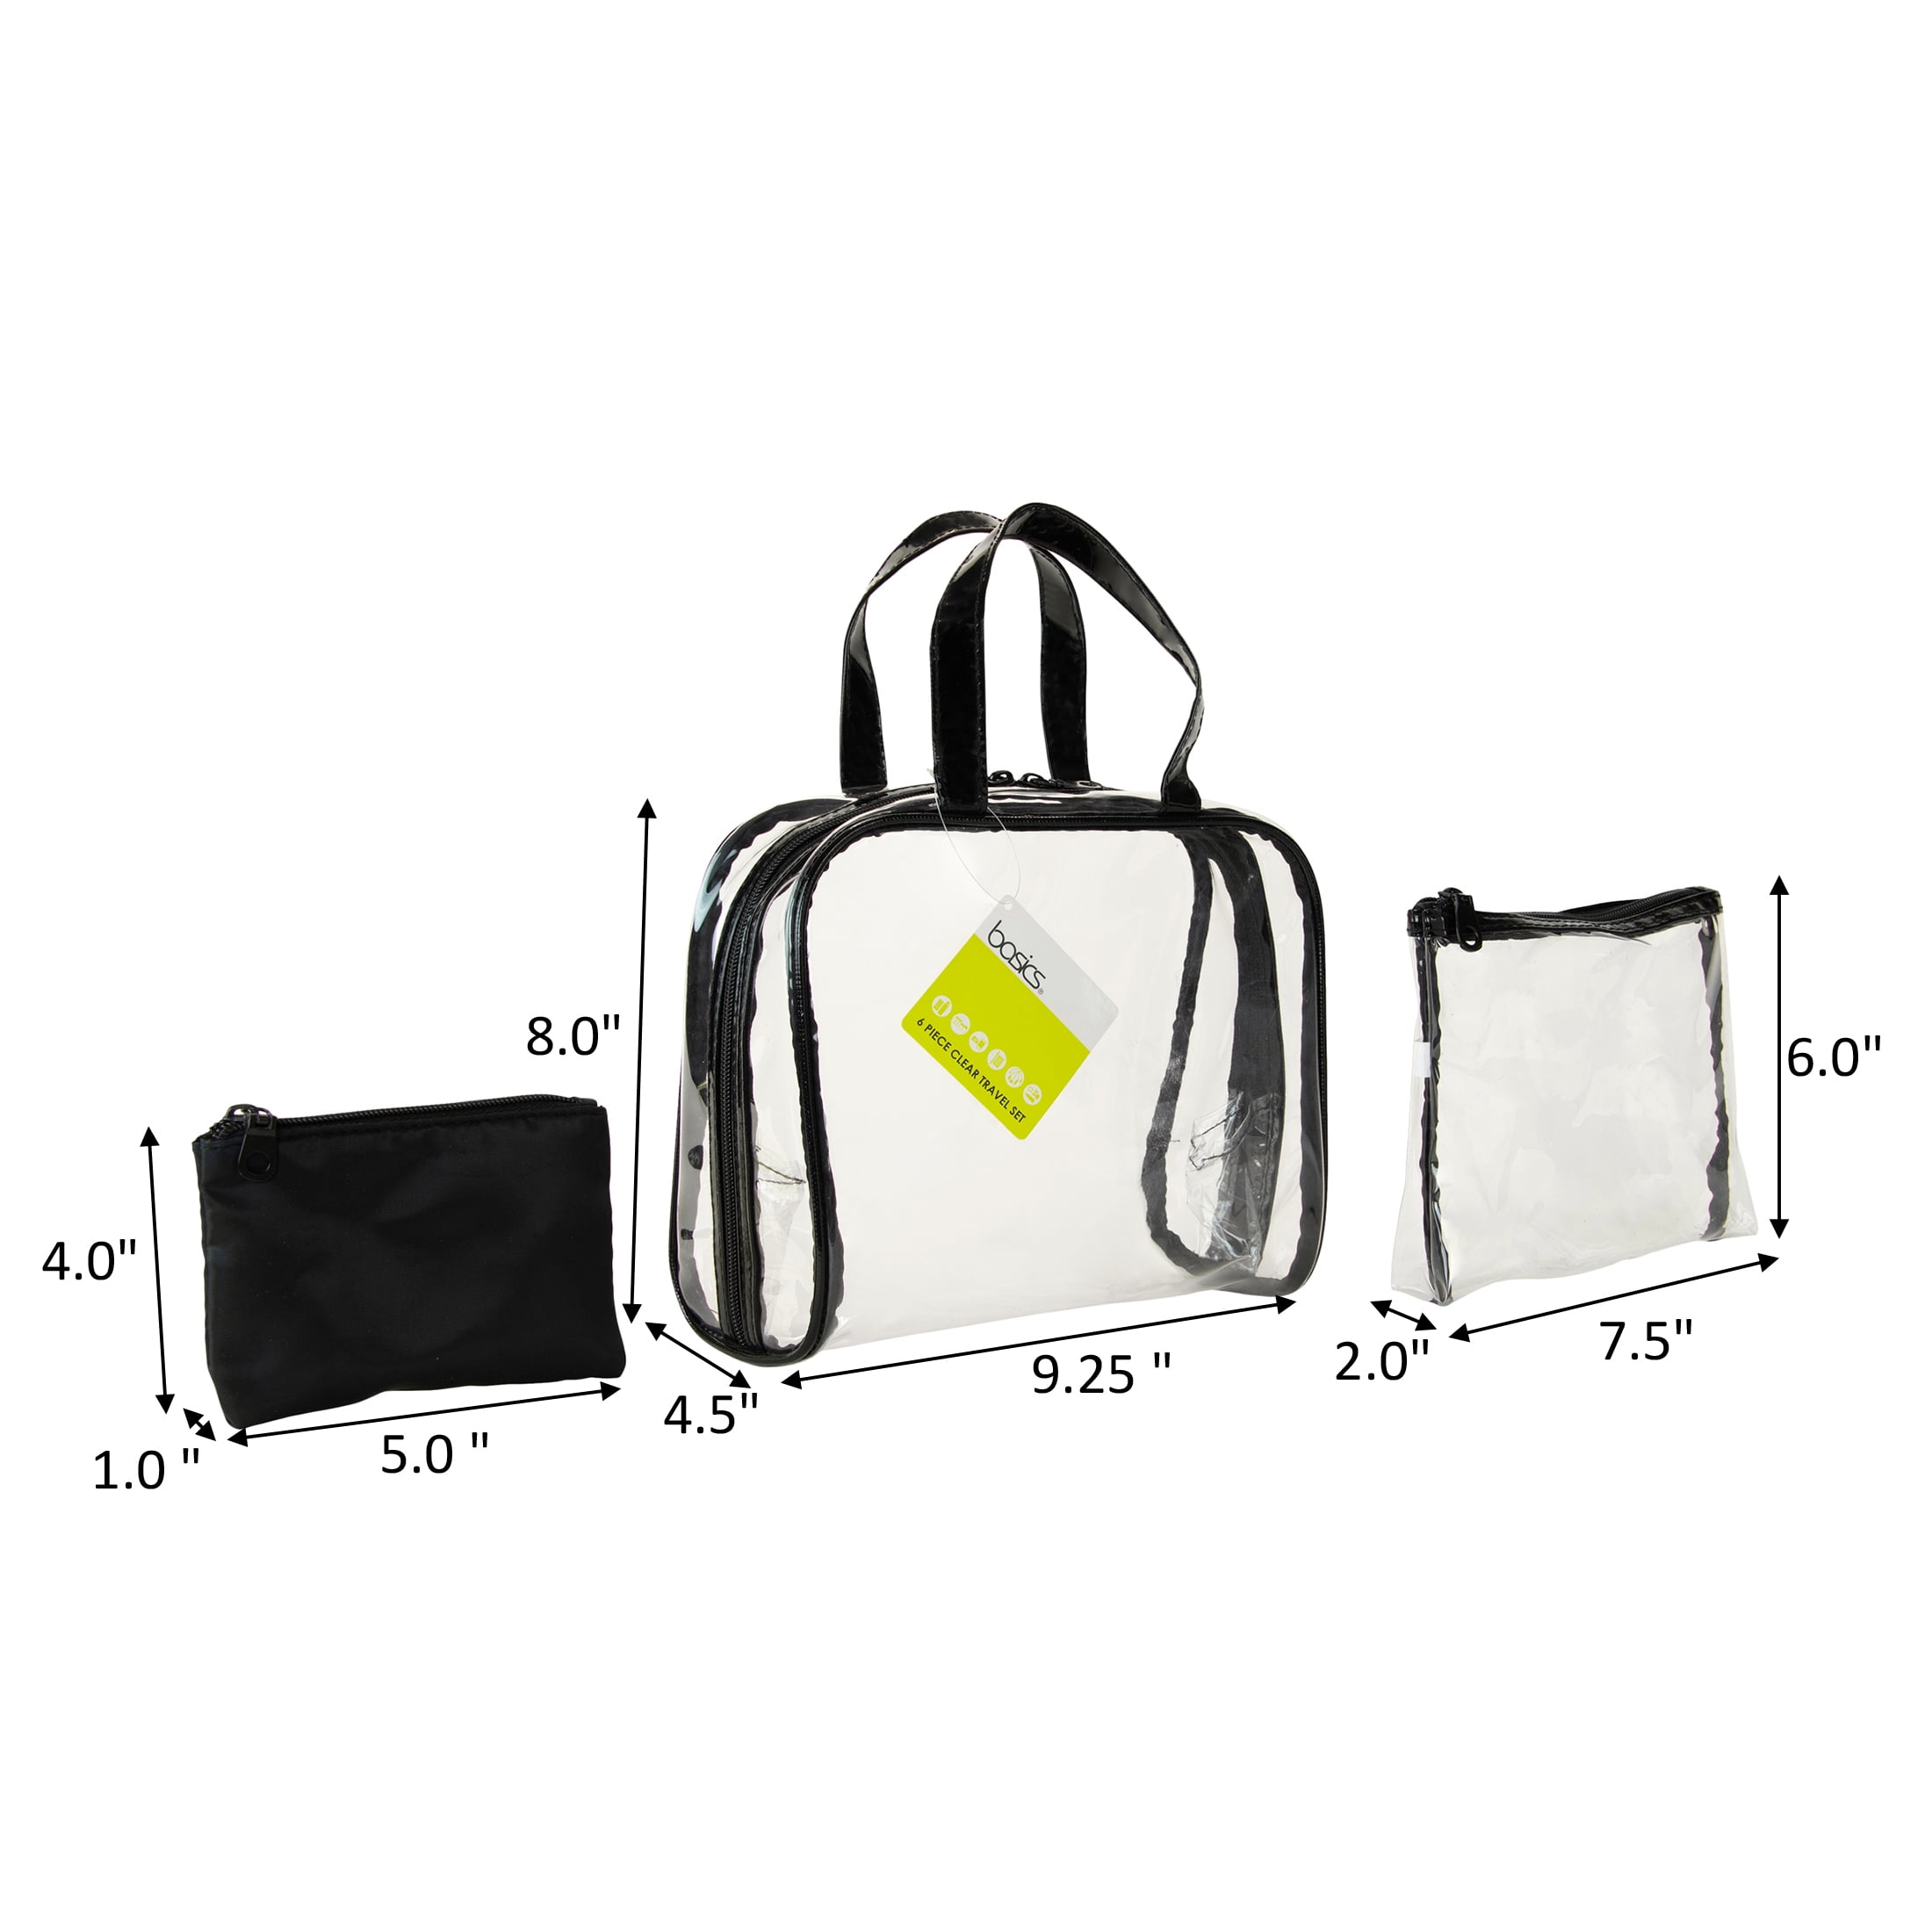 Compare prices for Travel set (LP0082) in official stores